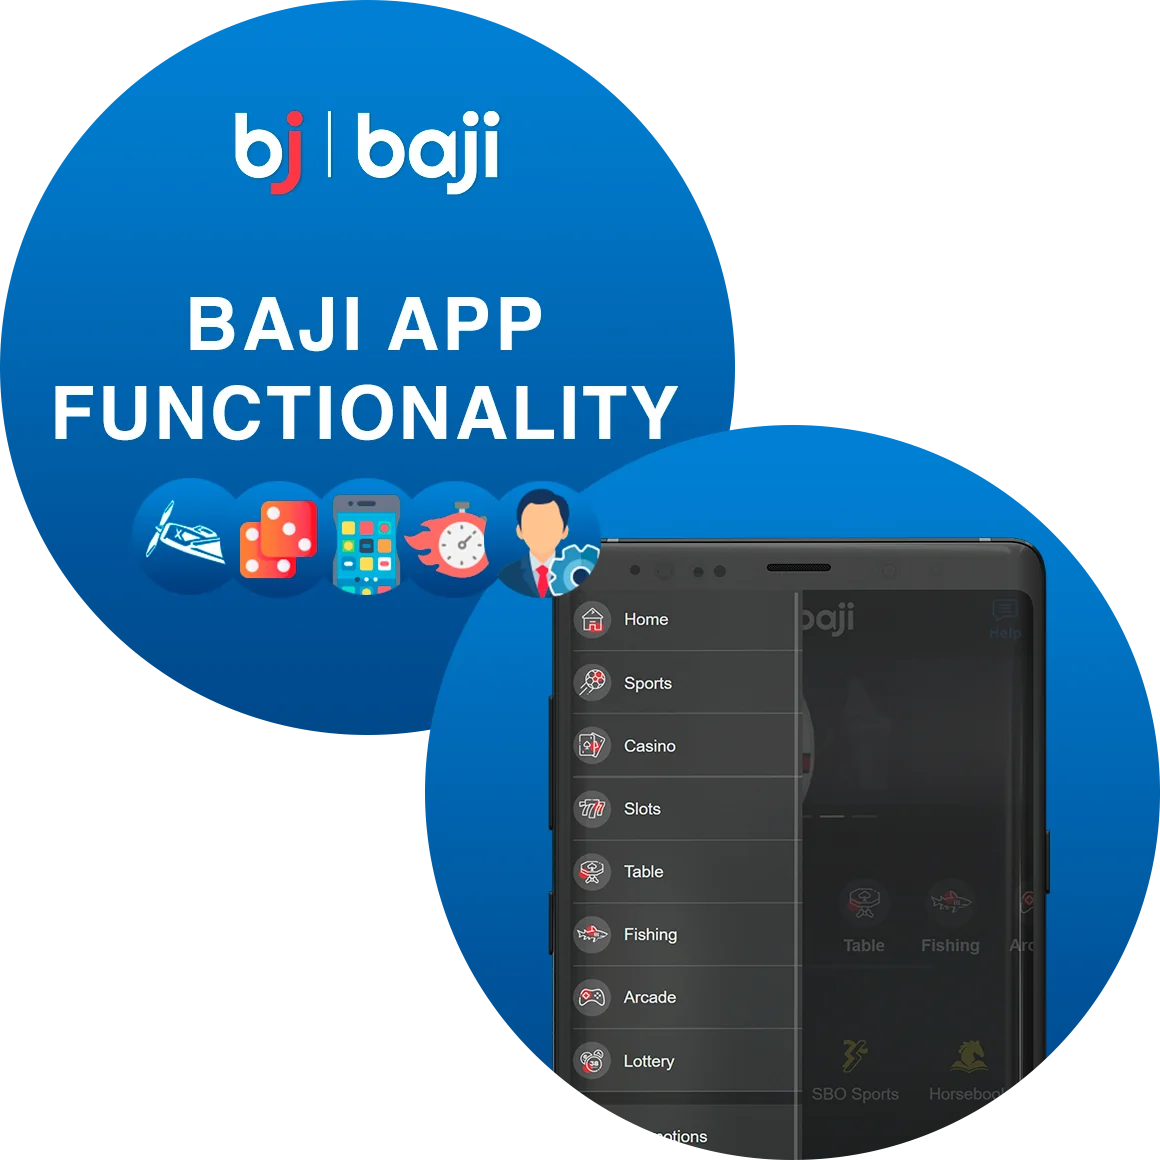 Baji App supports all main functionality of web and mobile web versions